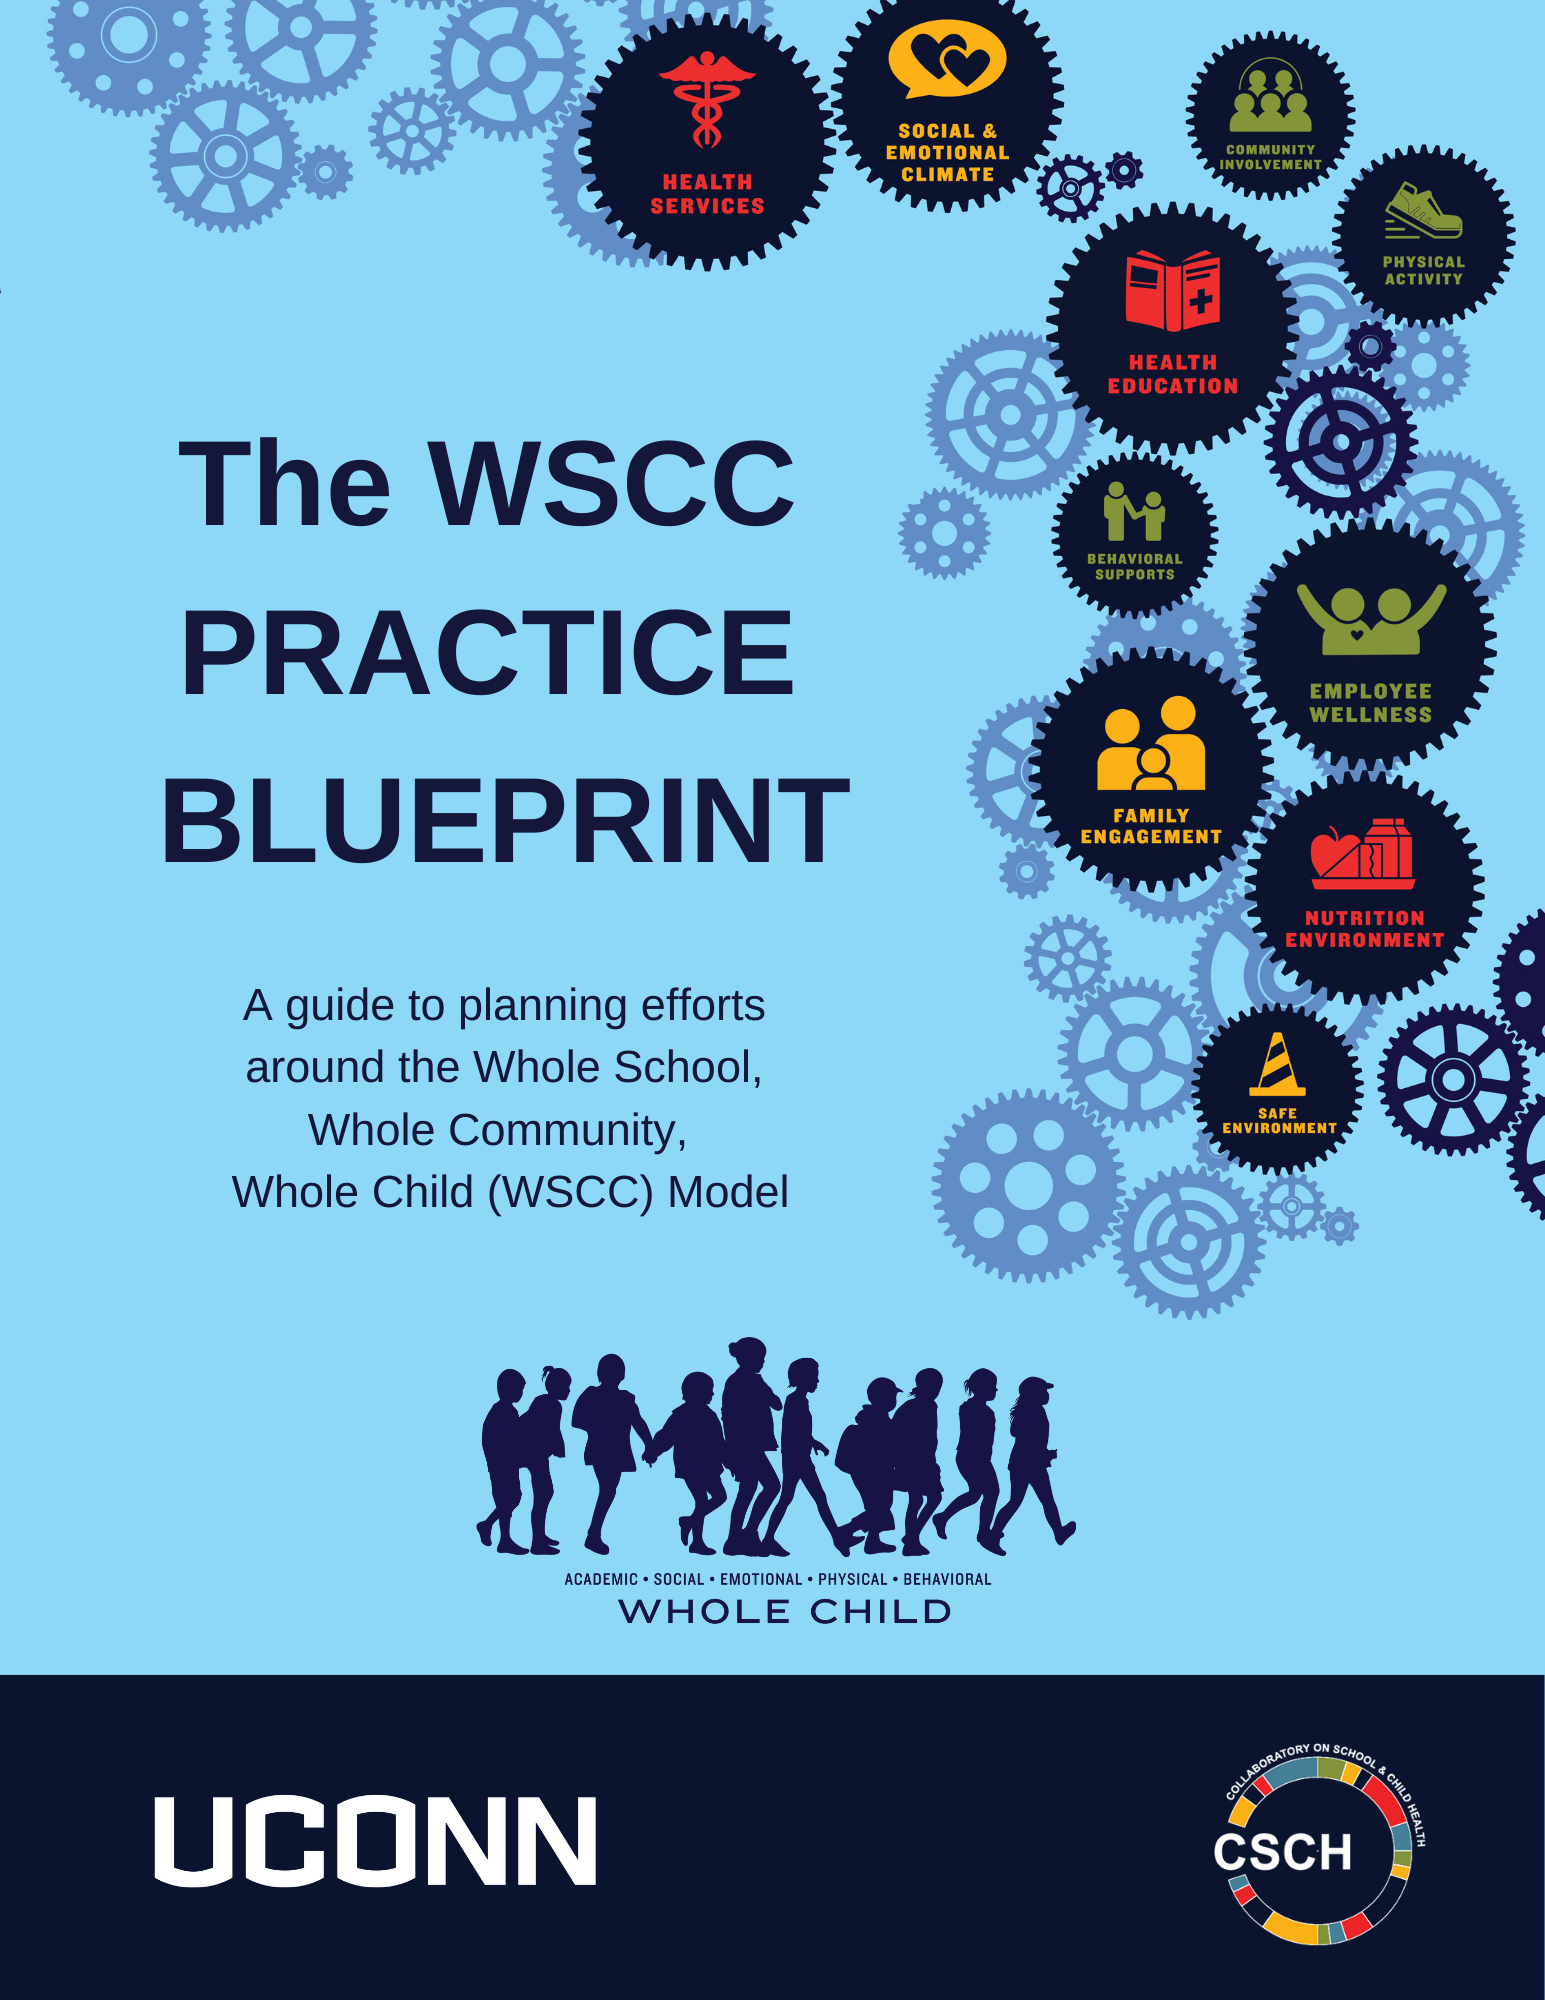 The WSCC Practice Blueprint: A guide to planning efforts around the Whole School, Whole Community, Whole Child (WSCC) Model